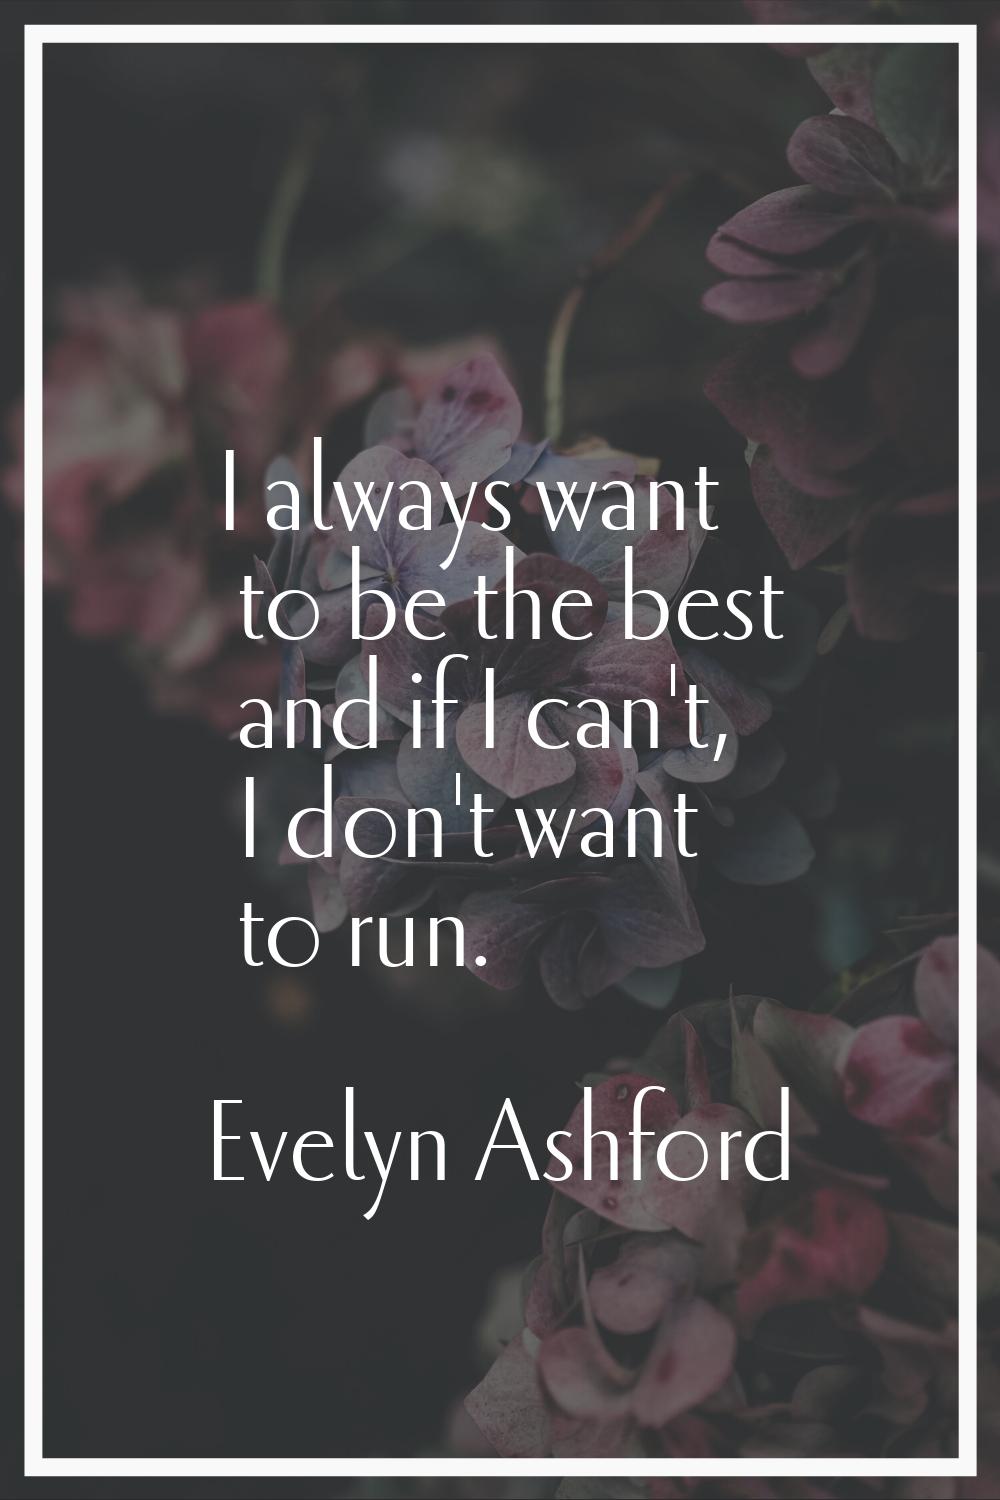 I always want to be the best and if I can't, I don't want to run.